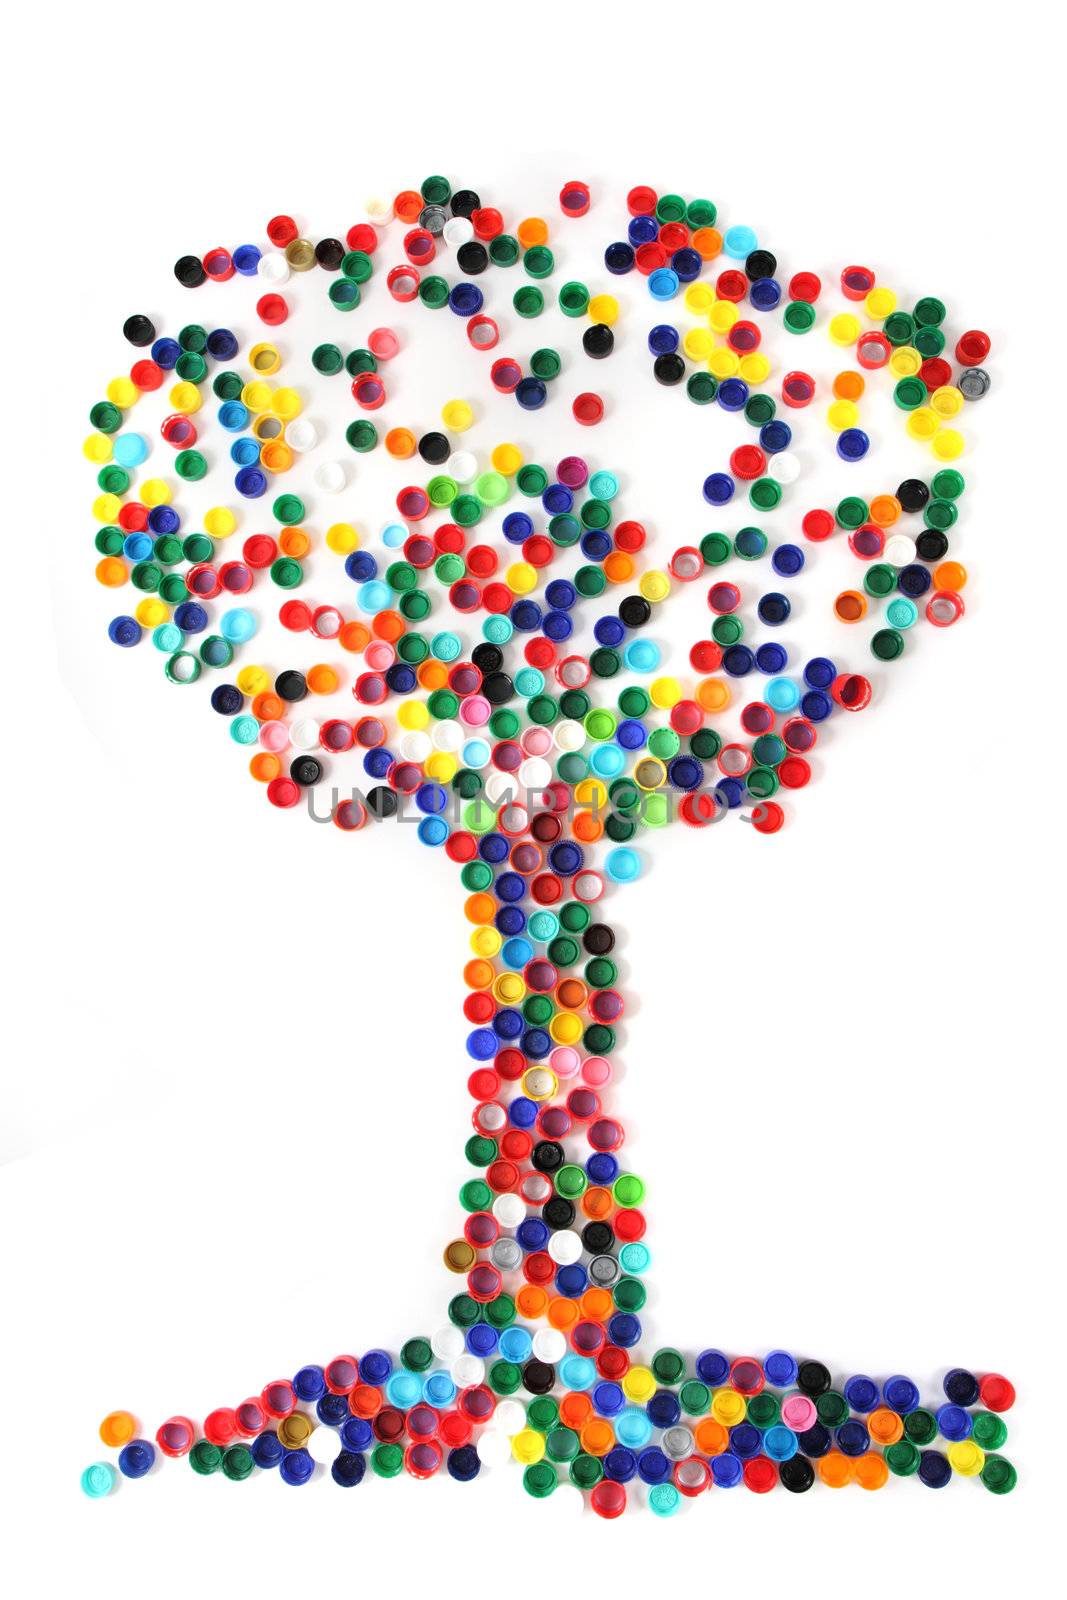 tree from the color caps  by jonnysek